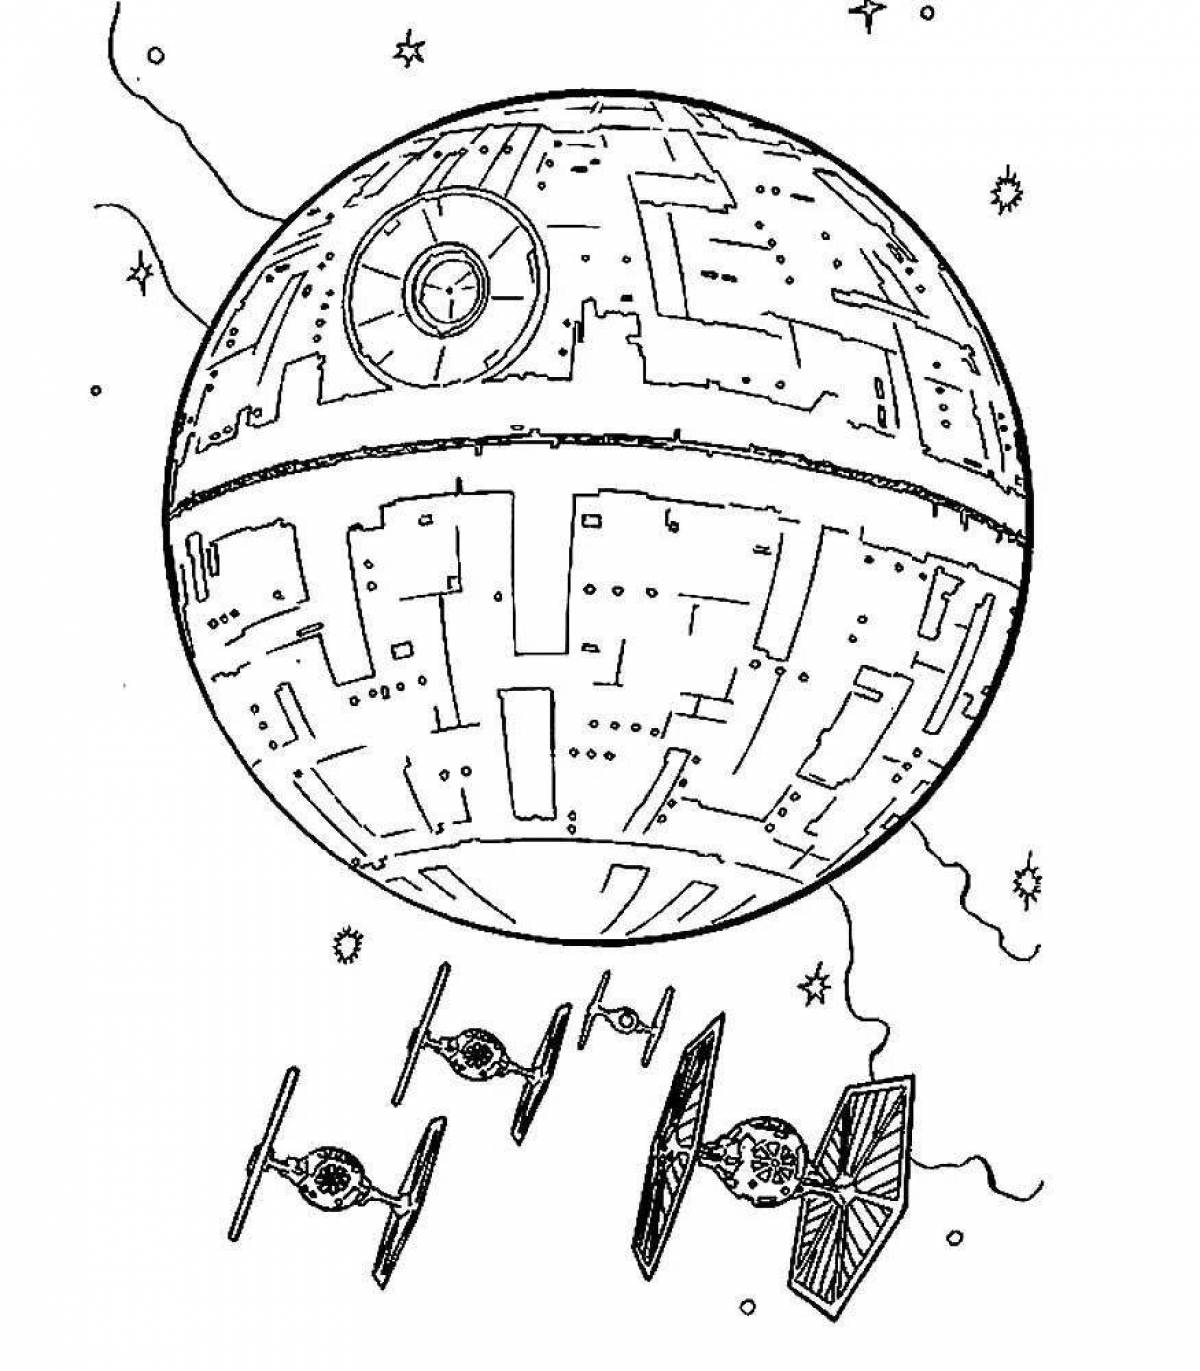 Majestic space wars coloring book